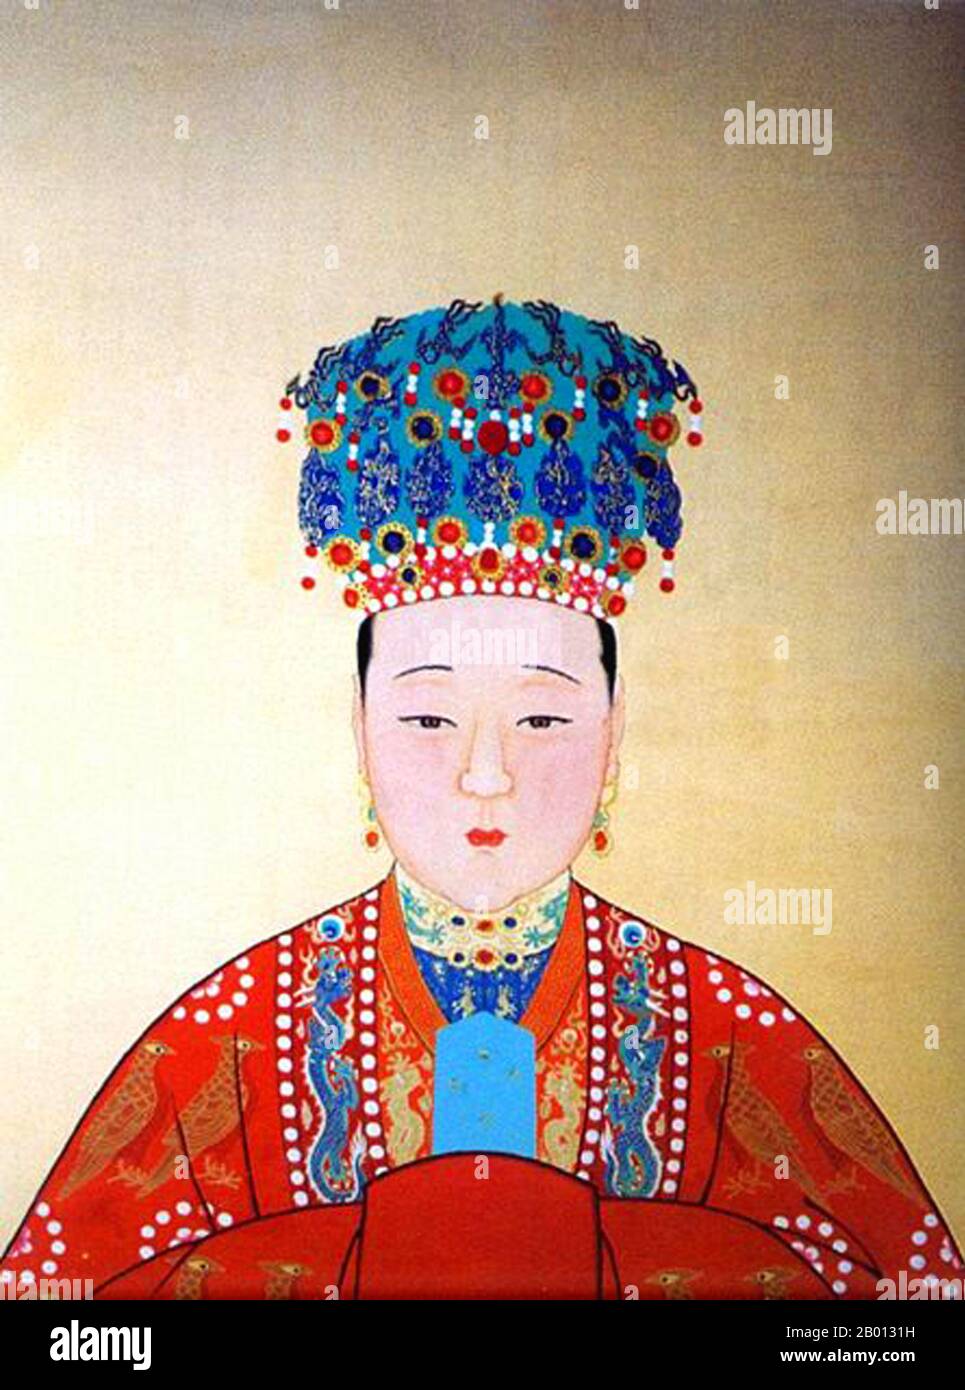 China: Empress Xiao Duan Xian (1565-1620), consort of the 14th Ming Emperor Wanli (r. 1572-1620). Hanging scroll painting, 16th-17th century.  Empress Xiaoduanxian (died 1620), personal name Wang Xijie, was the consort of the Wanli Emperor Wanli on the Ming Dynasty. She bore him no sons, and was known for her solemn manner, filial piety and extreme cruelty to her servants, often having her chambermaids beaten, sometimes to death. She became the longest serving empress consort in Chinese history. Stock Photo